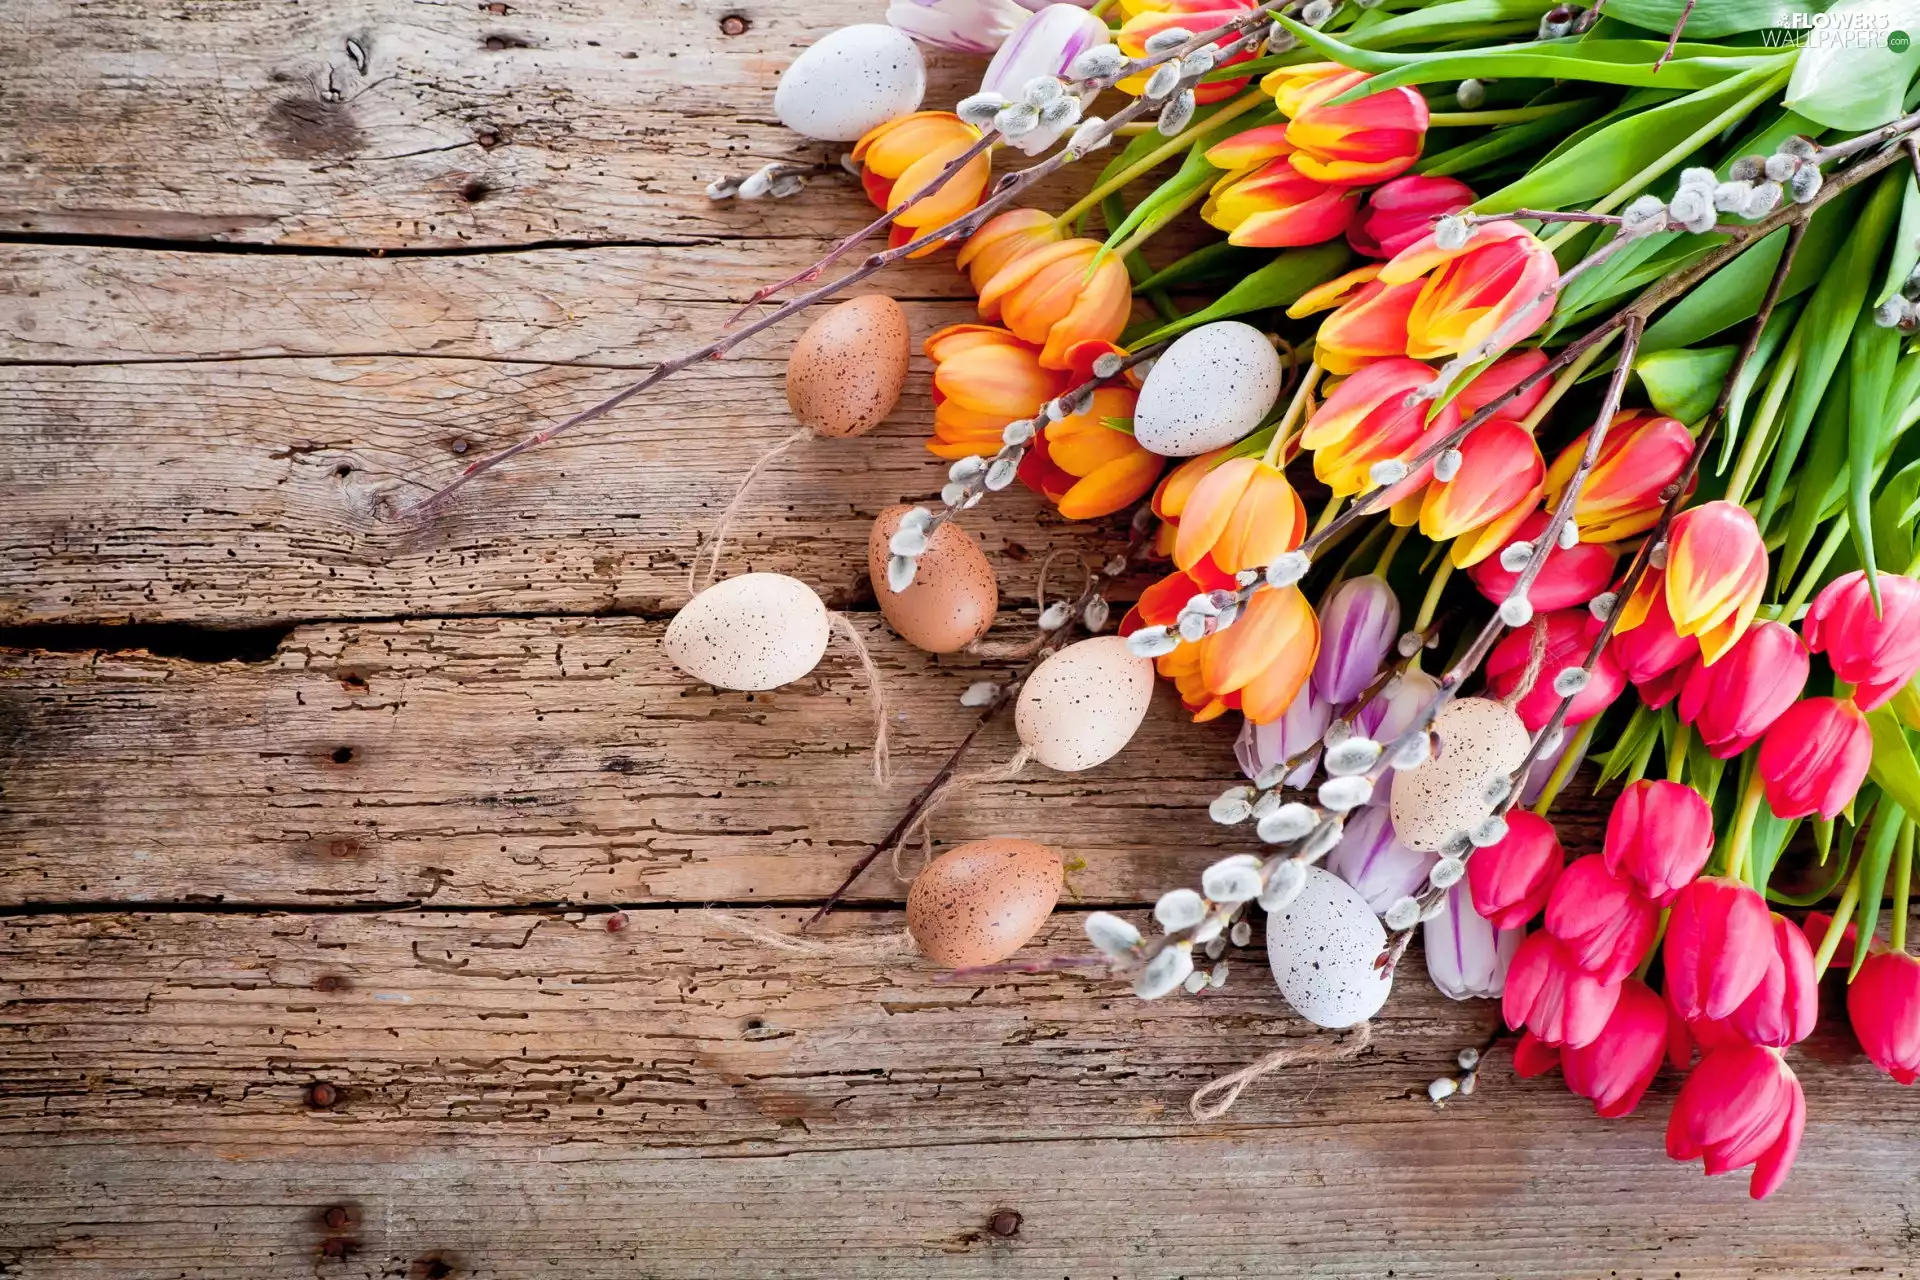 Tulips, database, Easter, eggs, composition